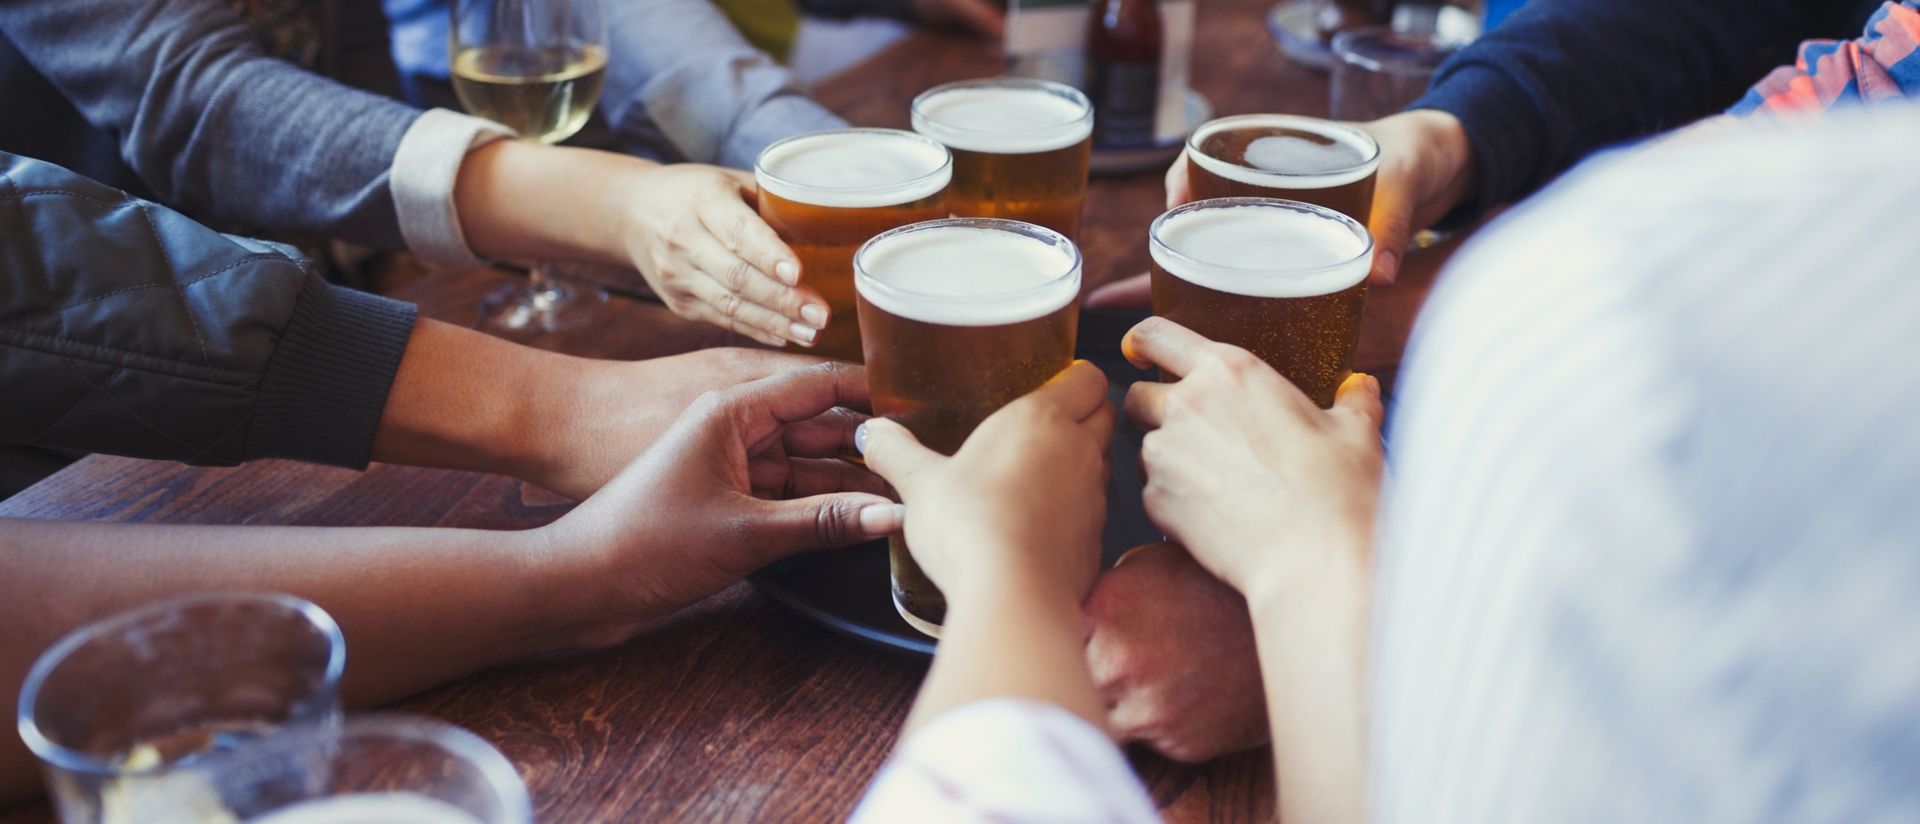 Friends reaching for beer glasses on bar table